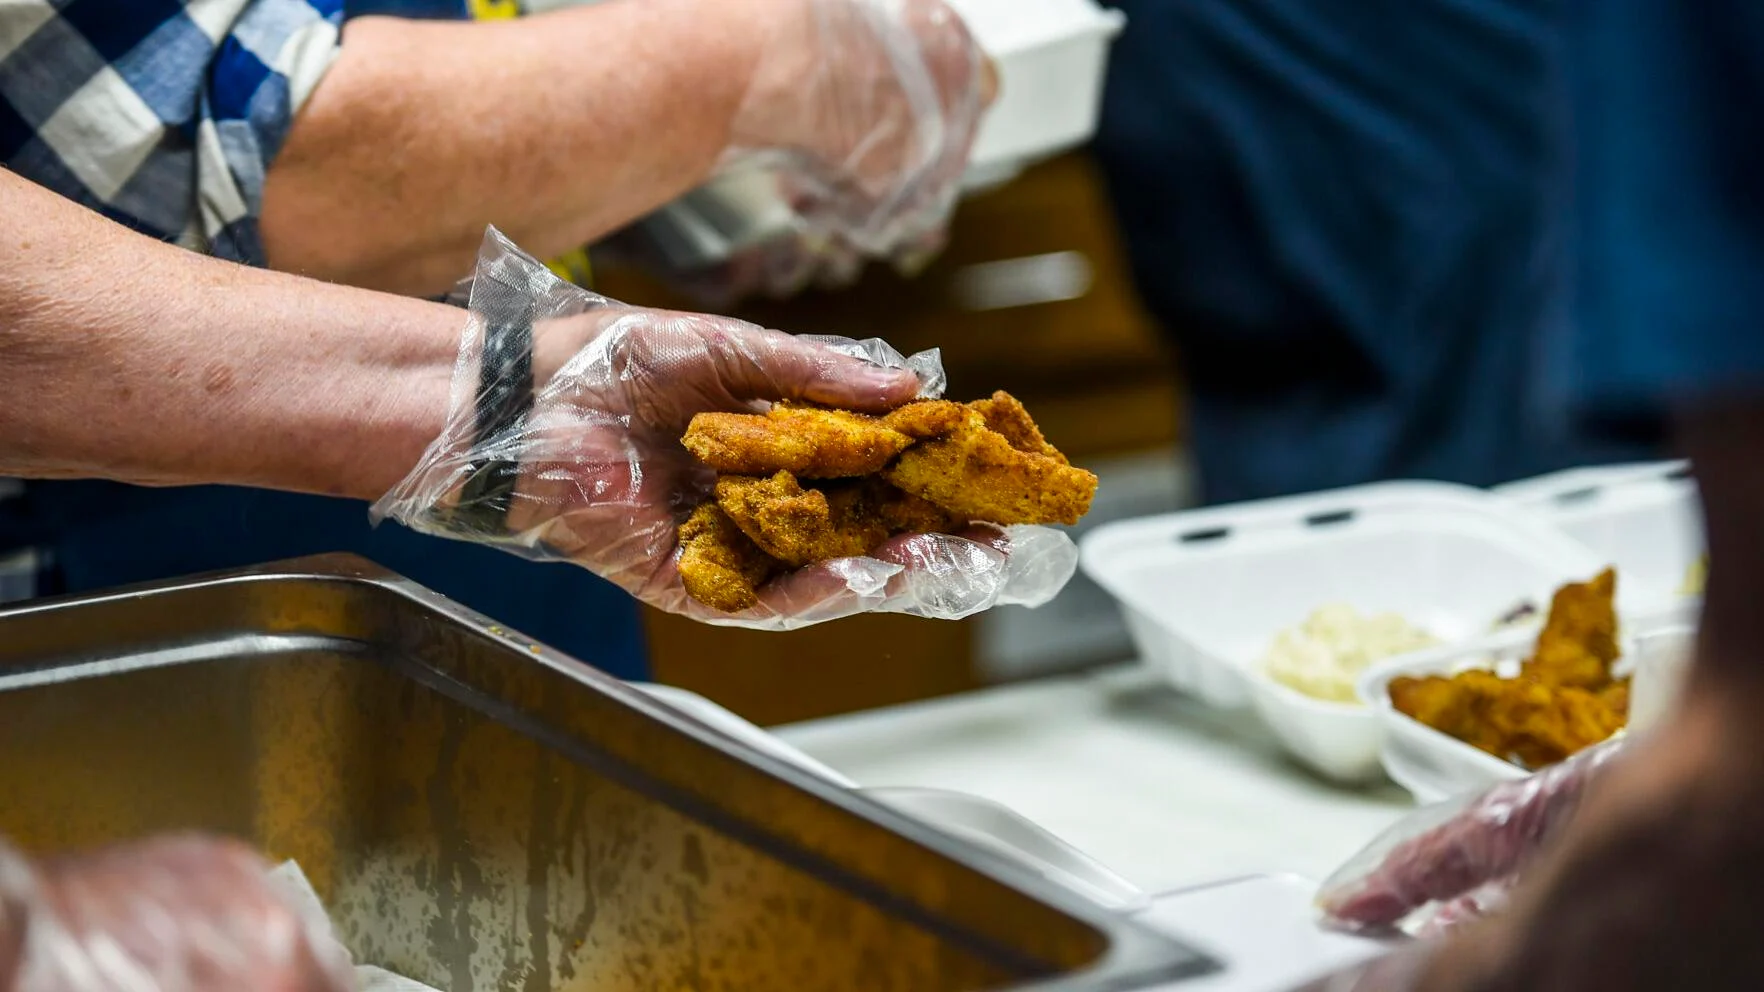 Free Community Fish Fry Event Planned by Metro West in Mechanicsville